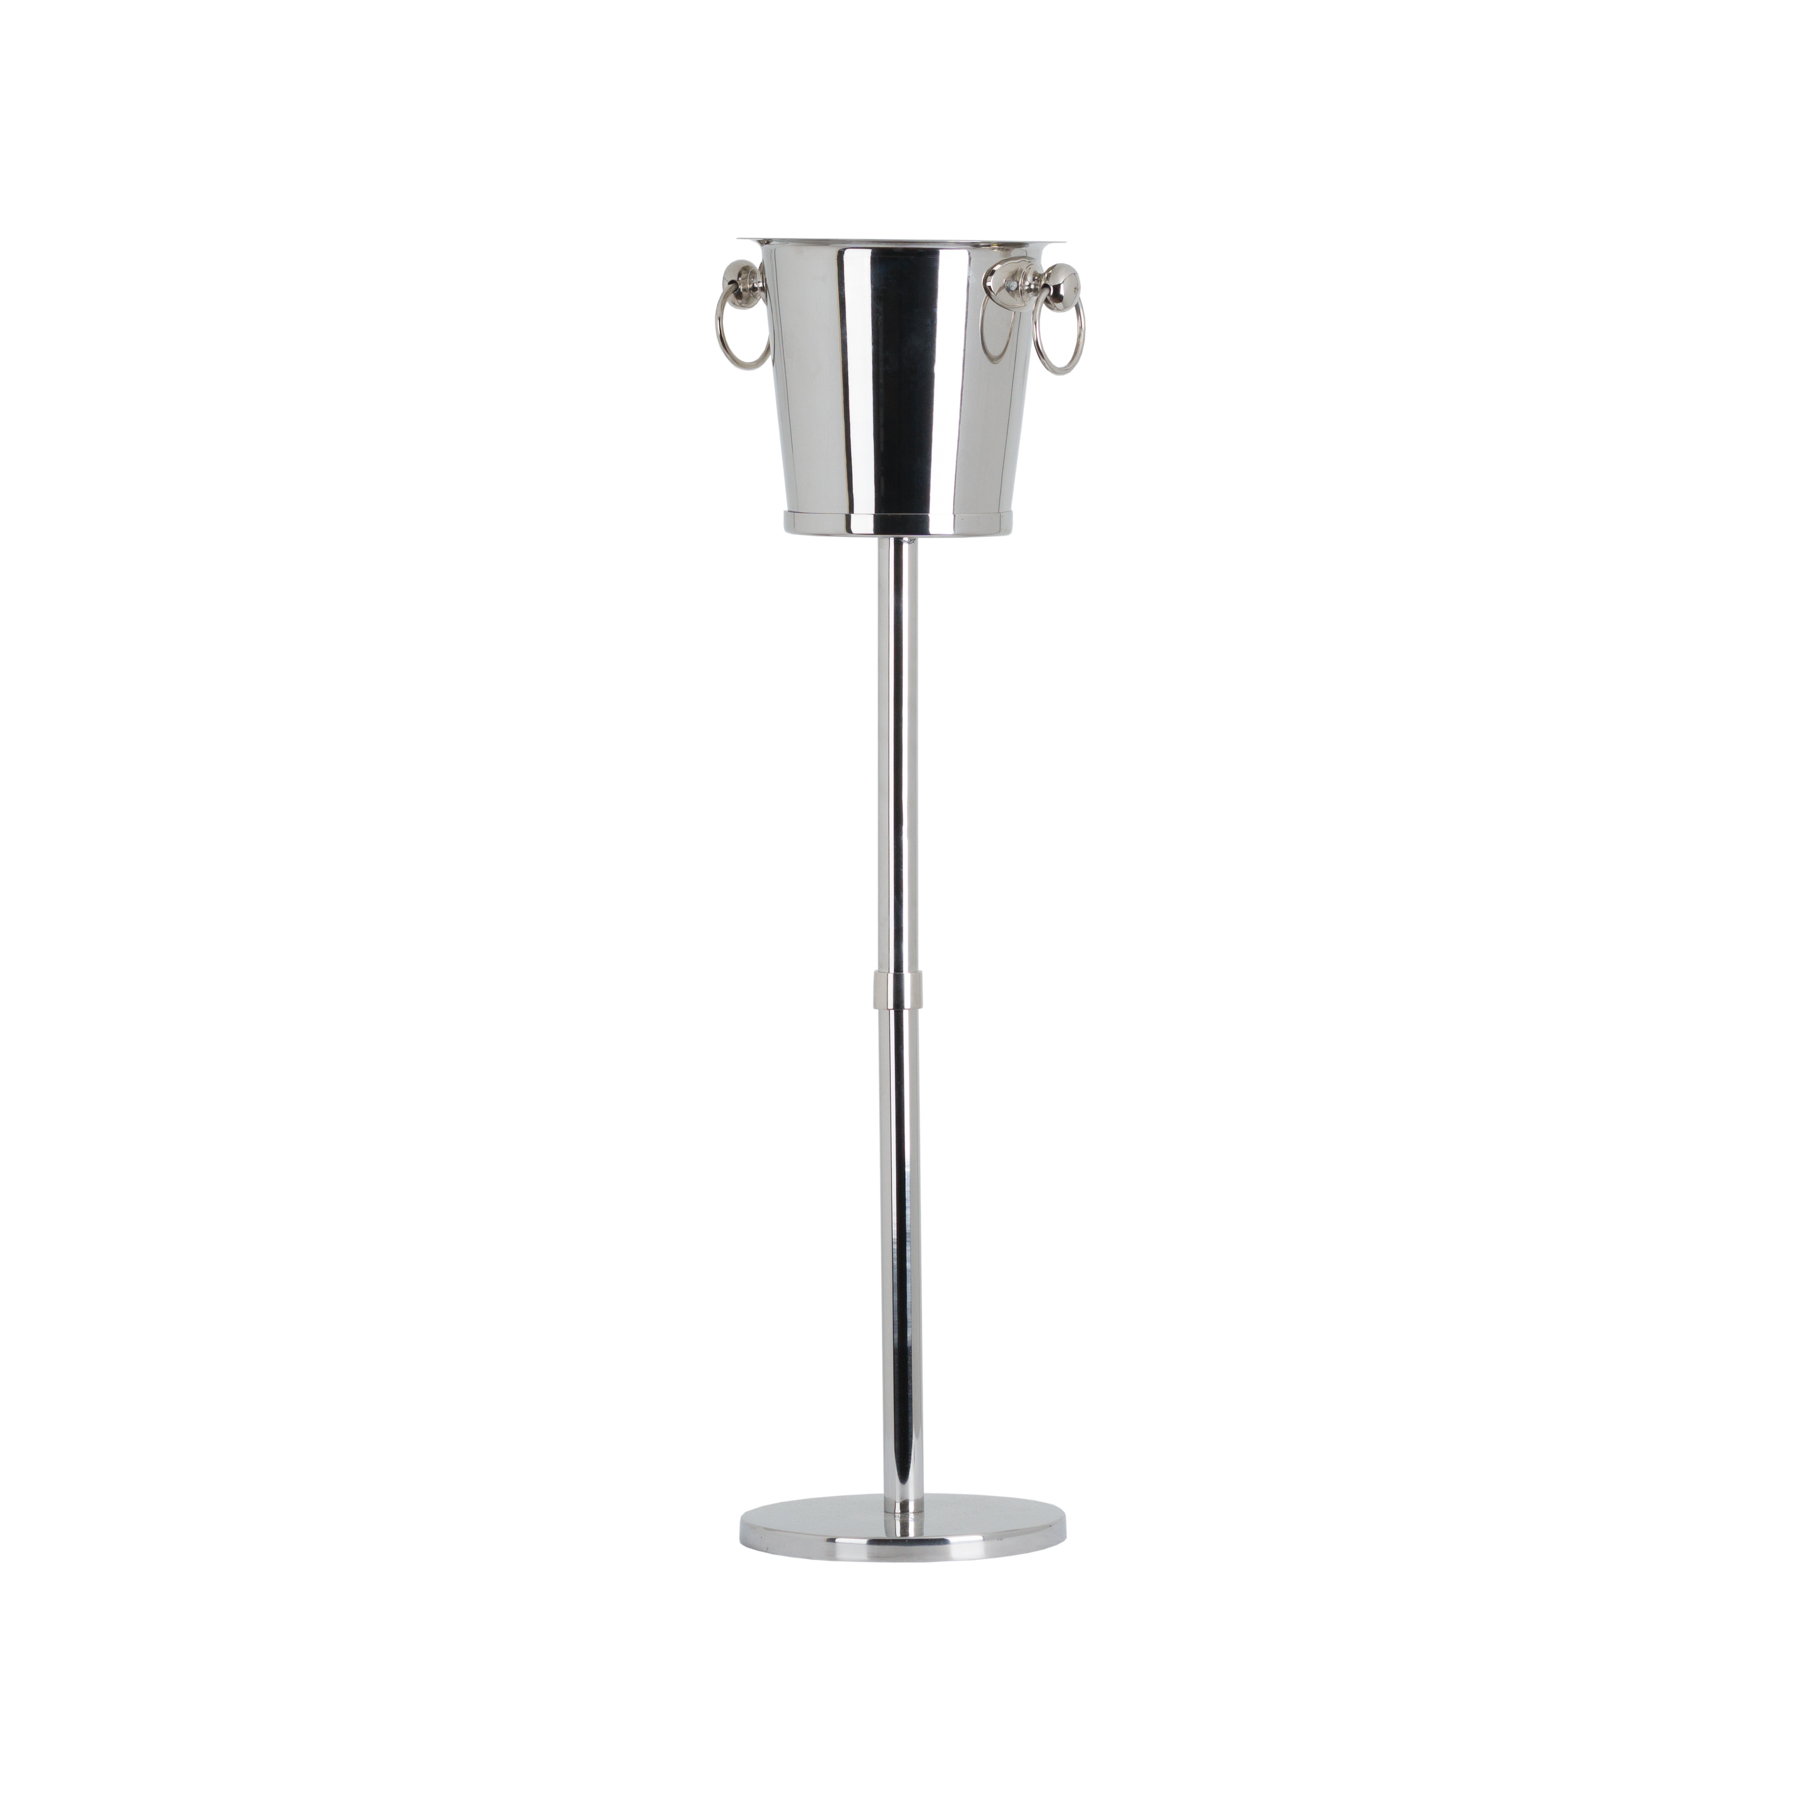 Champagne Bucket On Stand Finished Nickel - Image 1